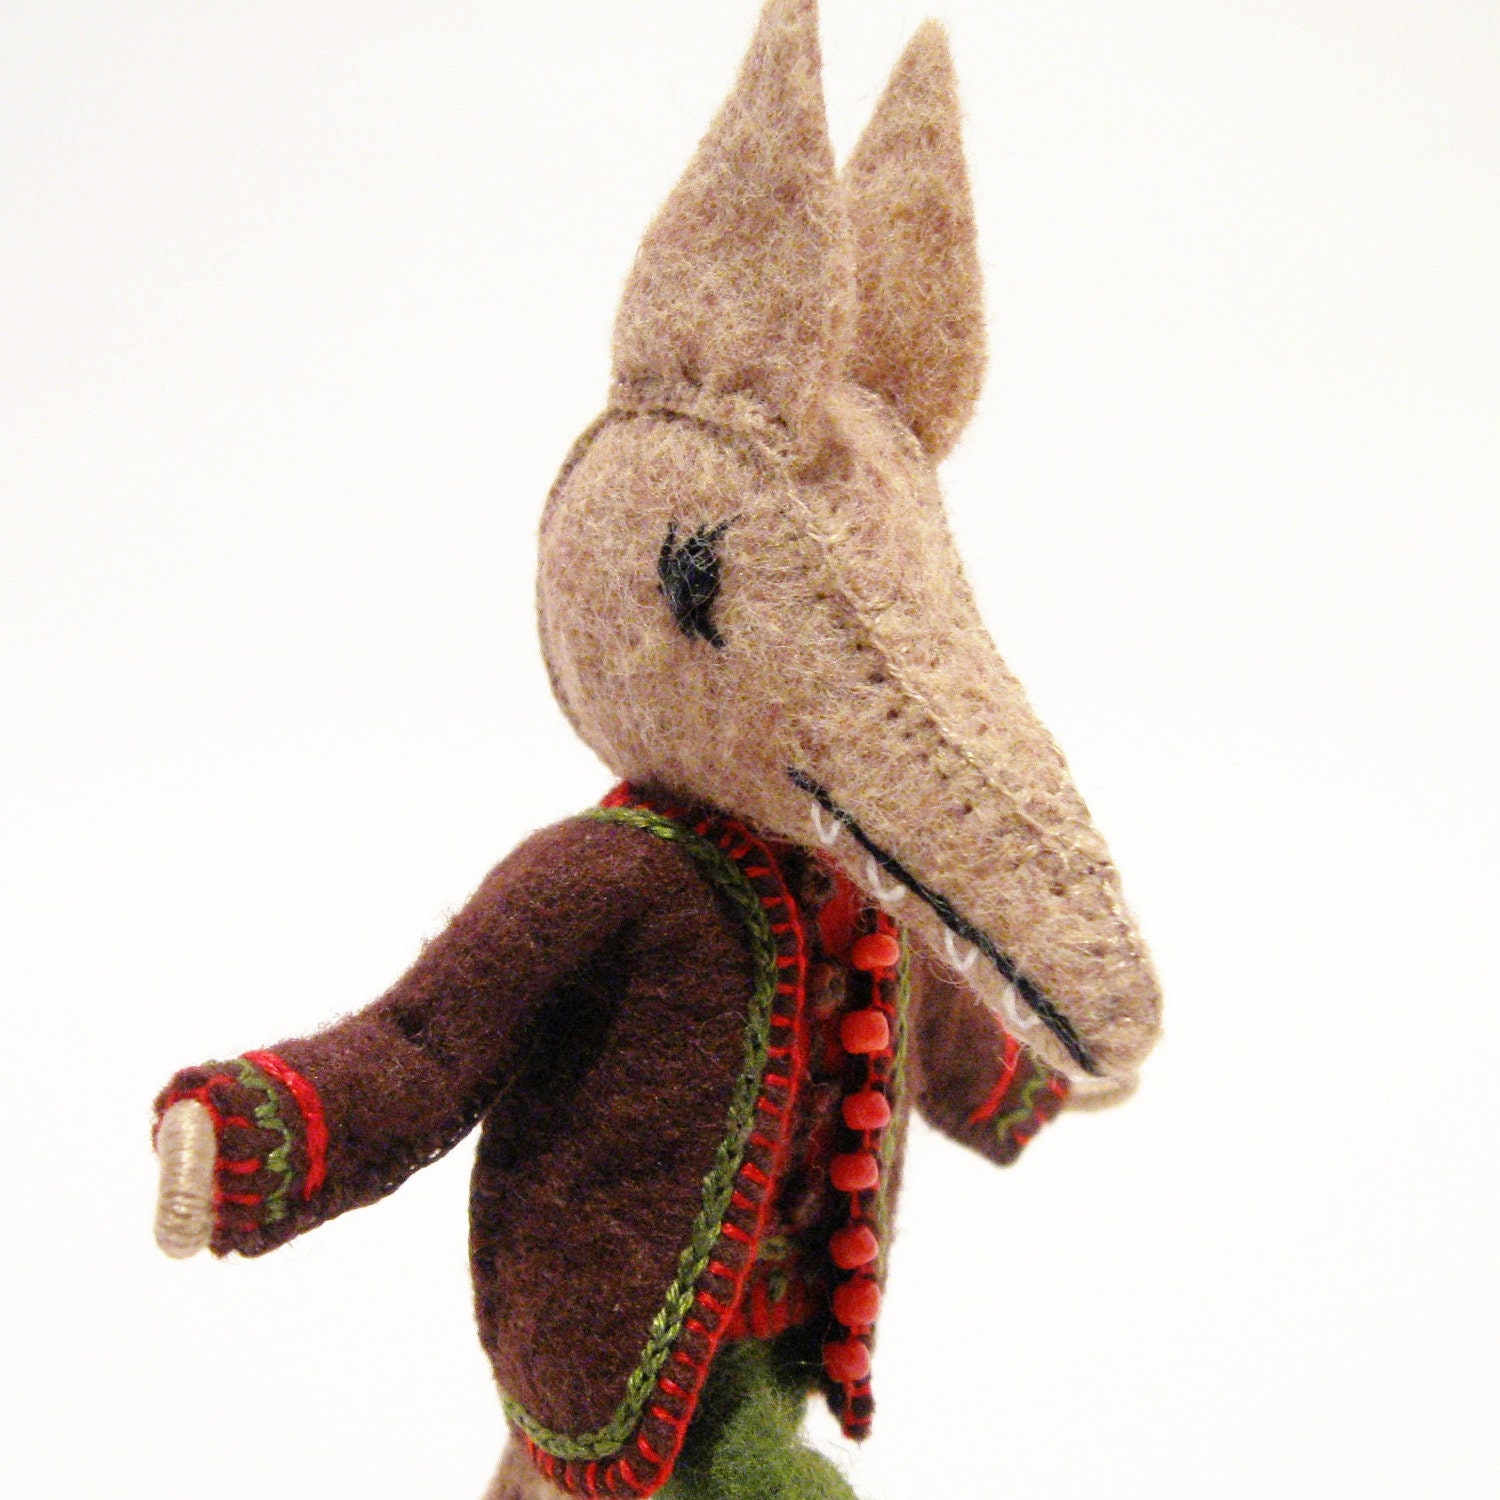 Big Bad Wolf Art Doll, Collectible, Hand Embroidered, Handmade, Fairytale